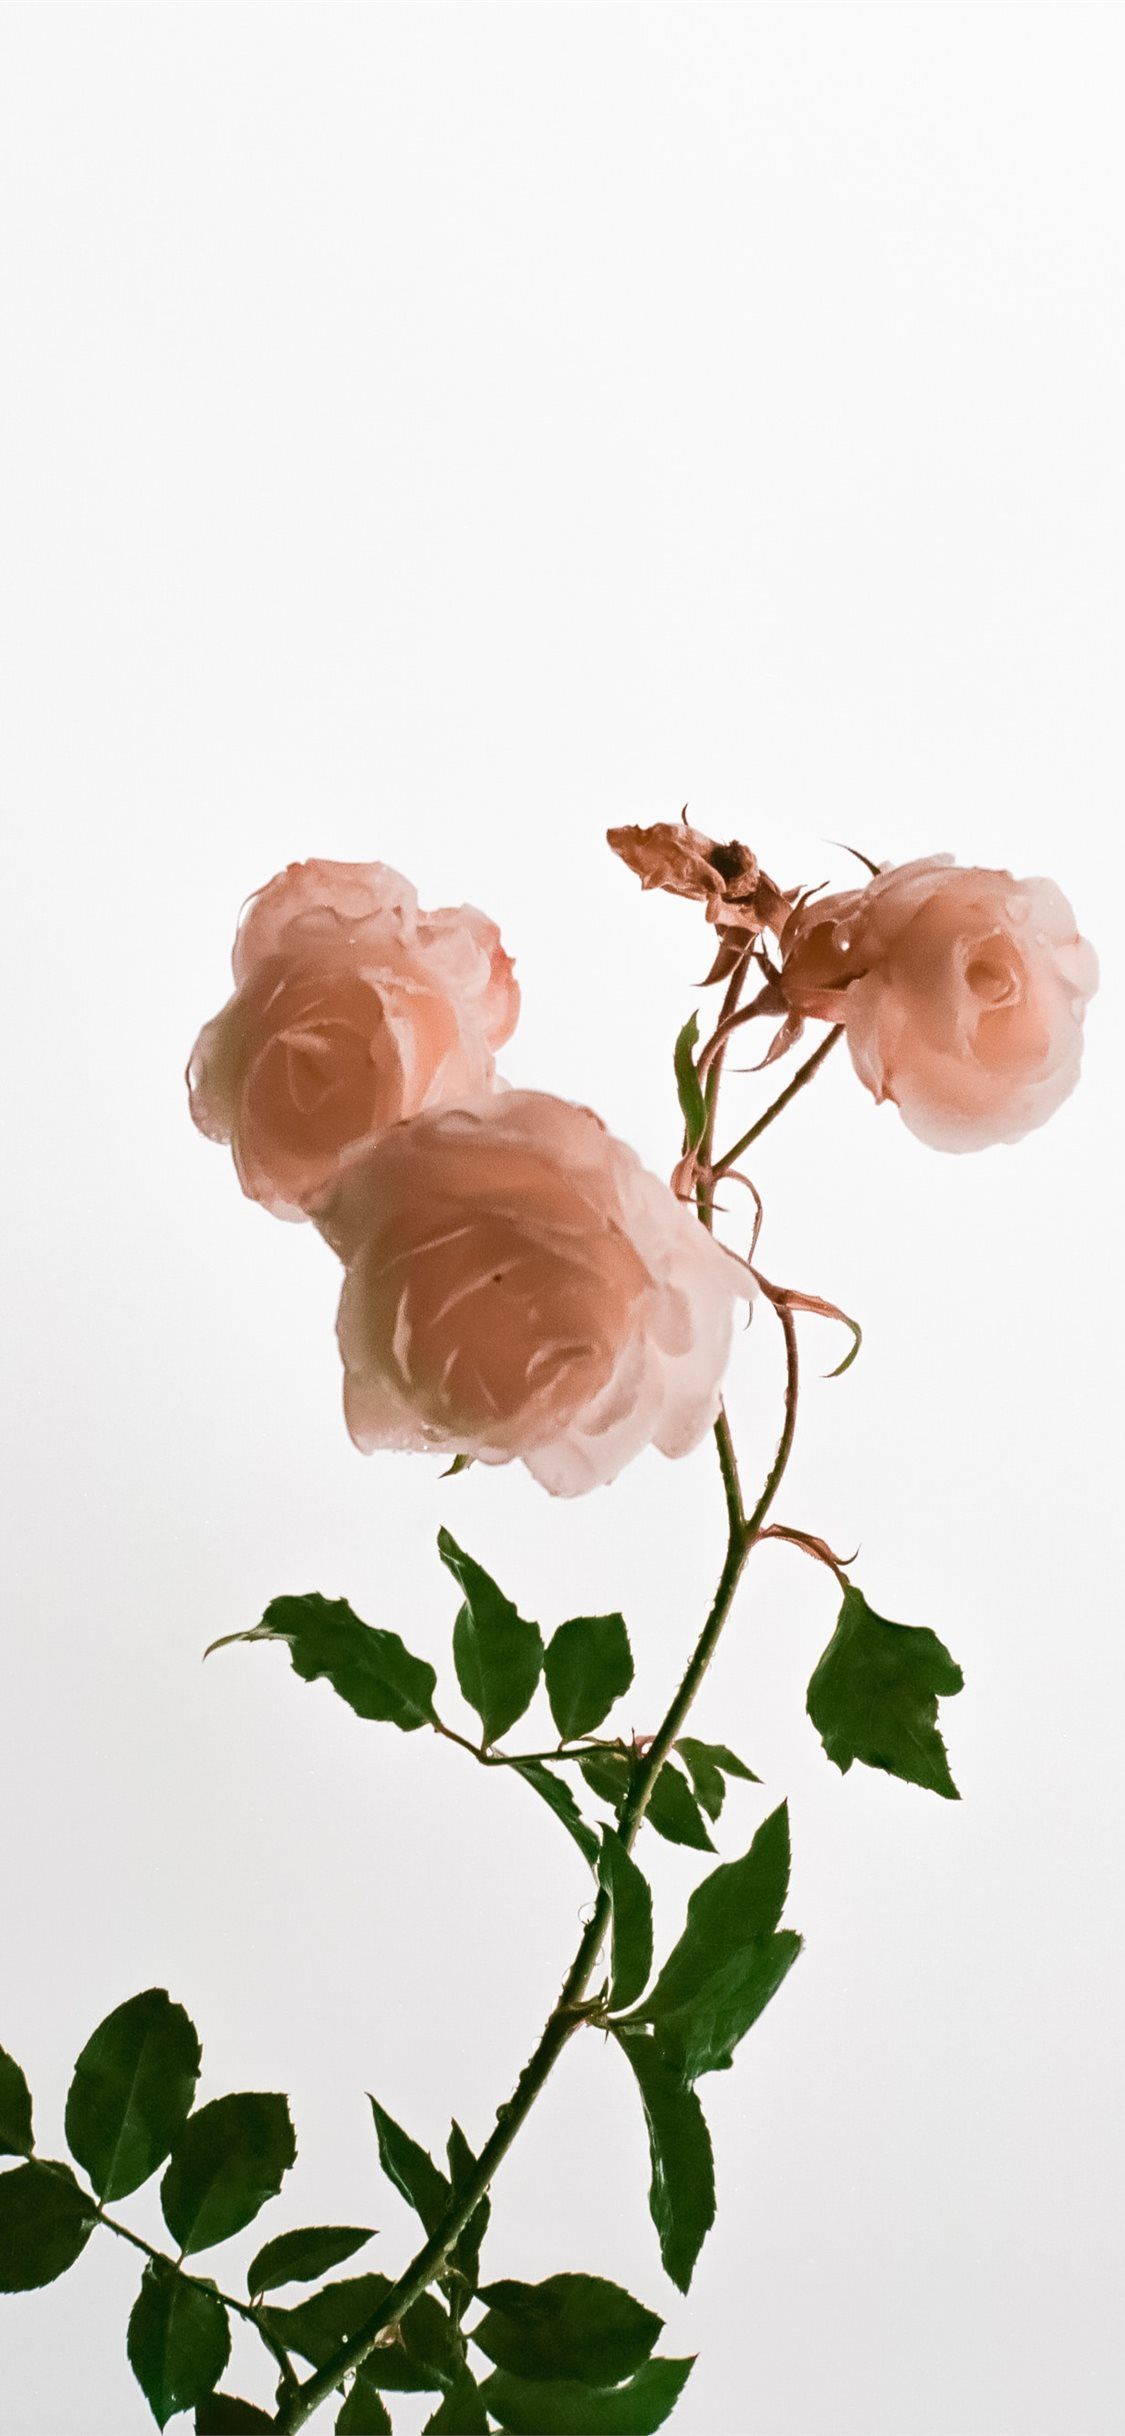 Aesthetic pink roses wallpaper for iPhone with white background. - Light pink